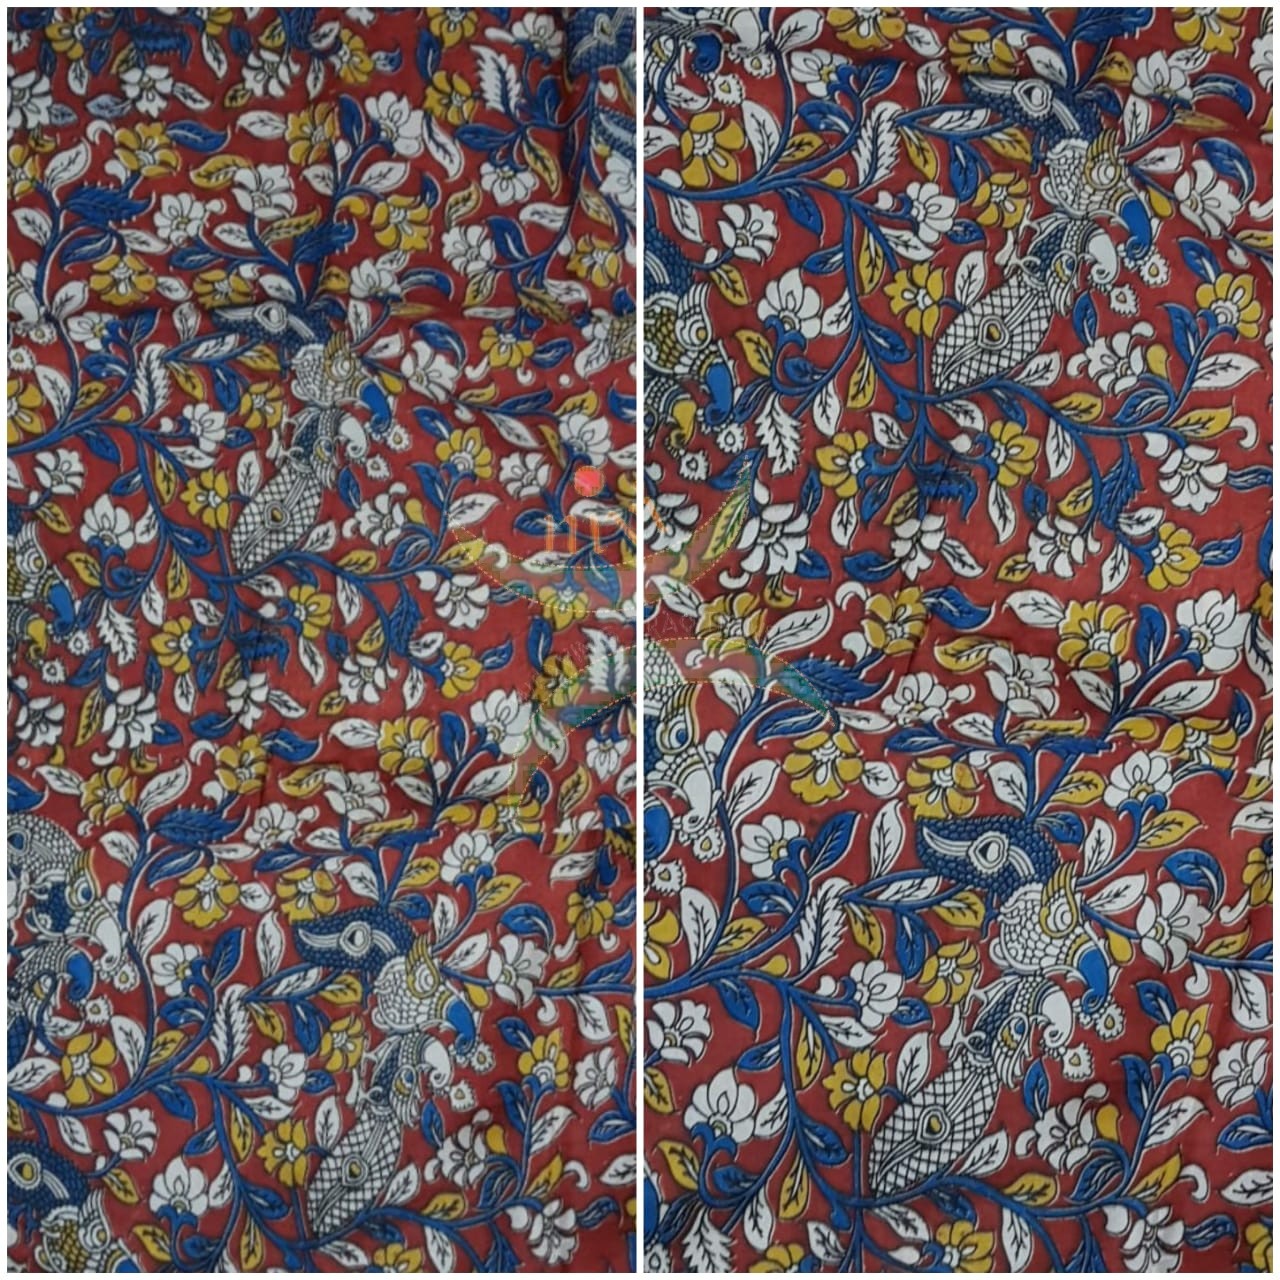 Red chennur silk kalamkari running material with peacock and floral motifs